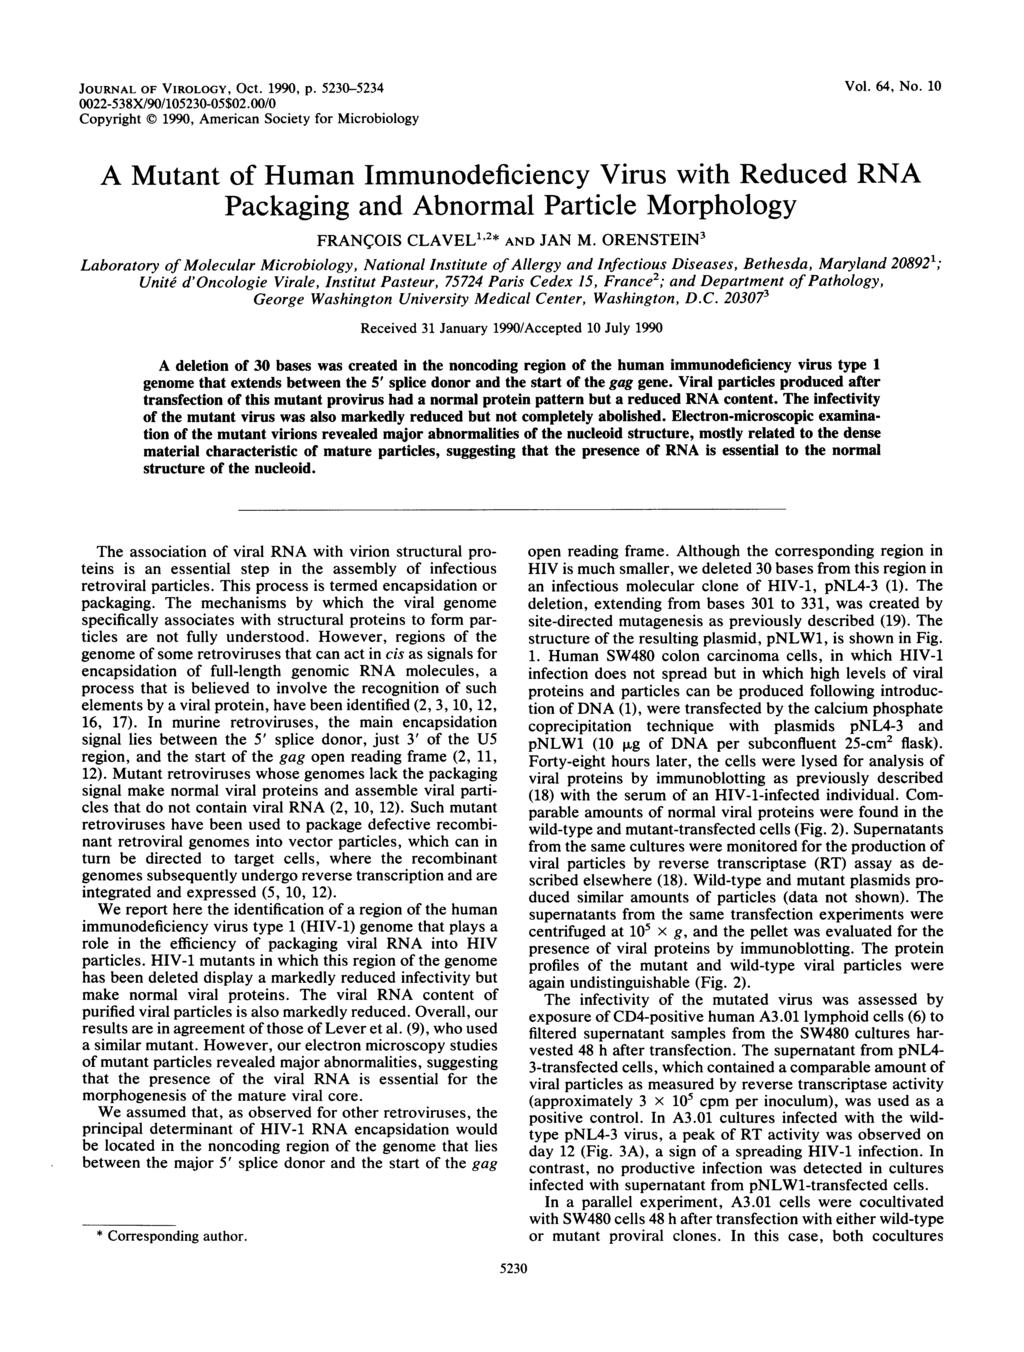 JOURNAL OF VIROLOGY, OCt. 1990, p. 5230-5234 0022-538X/90/105230-05$02.00/0 Copyright 1990, American Society for Microbiology Vol. 64, No.